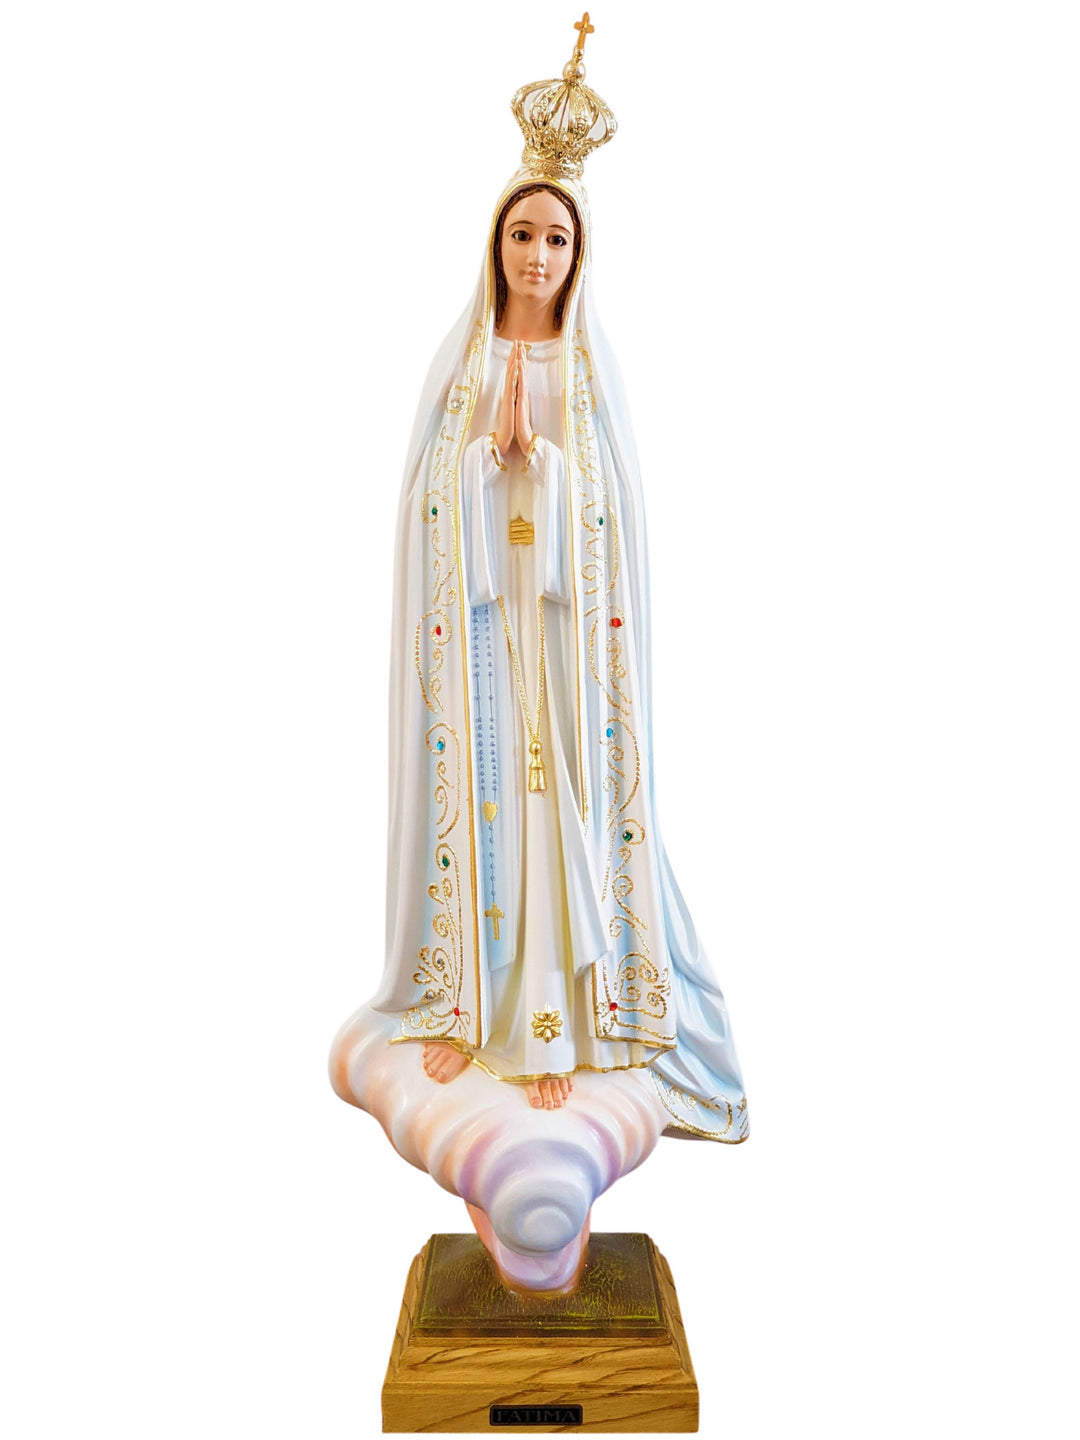 23 Inch Glass Eyes Our Lady of Fatima Statue Made in Portugal